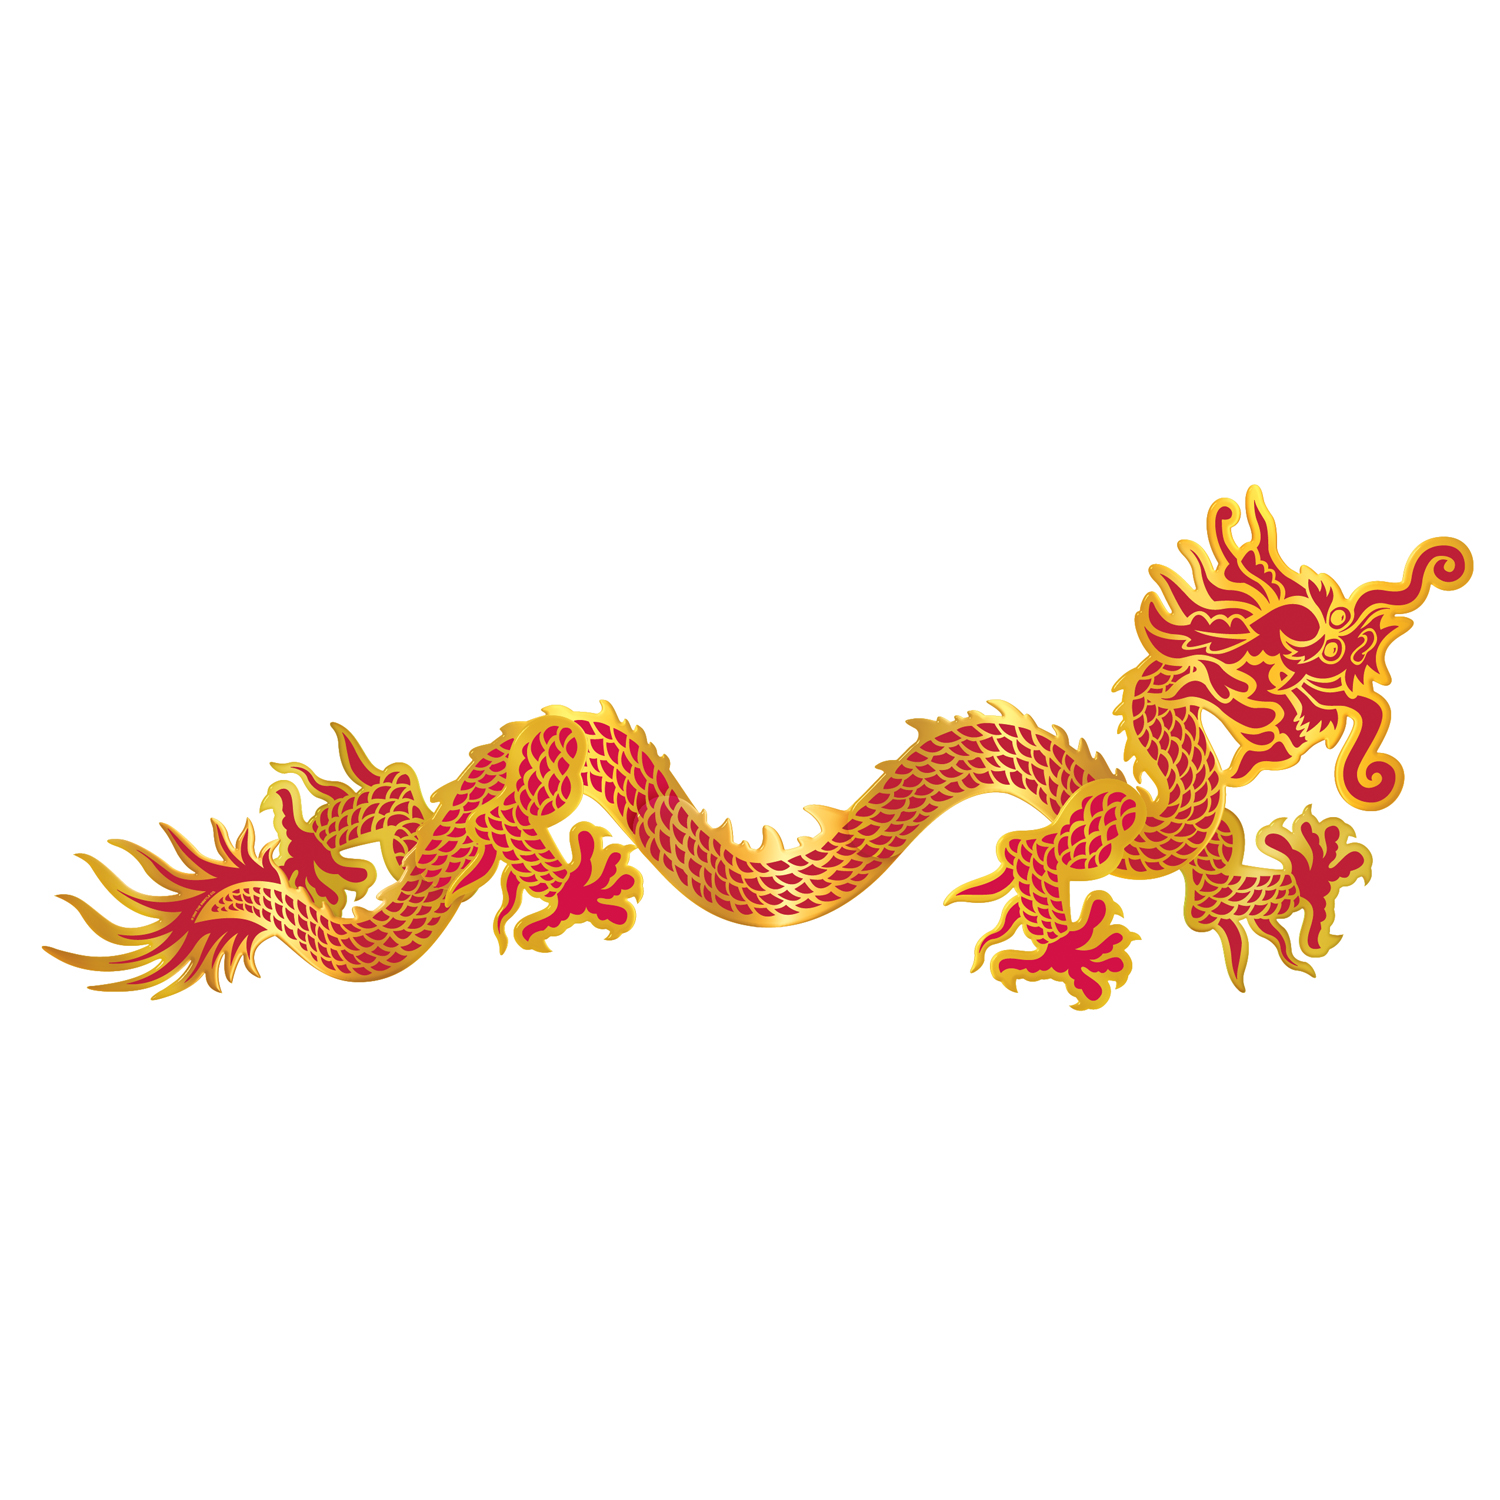 12 Wholesale Jointed Dragon